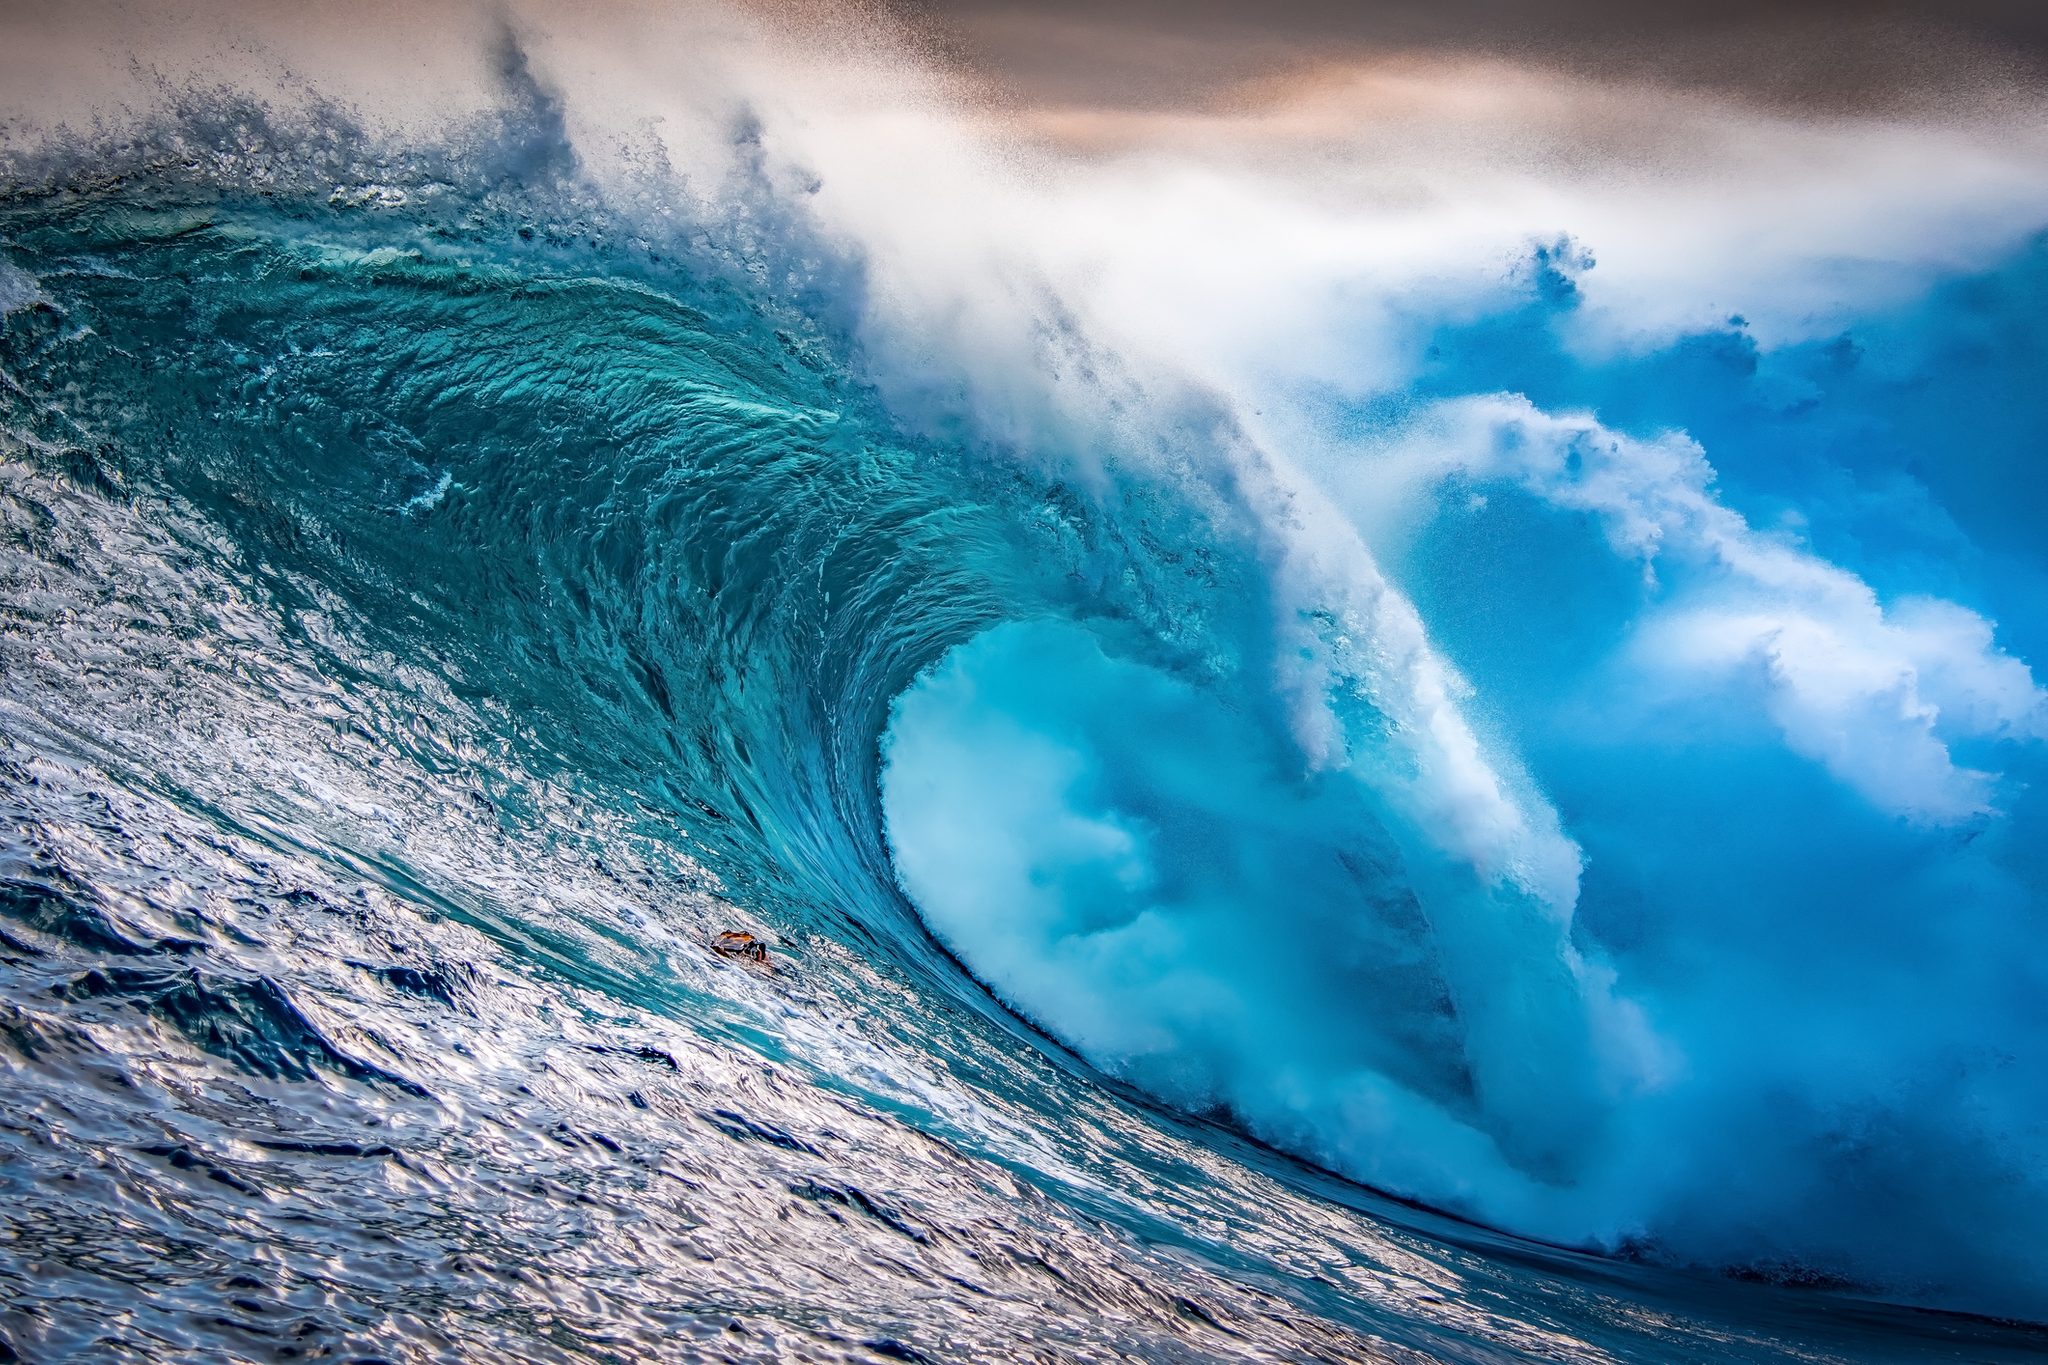 20 Breathtaking Wave Photos You Won’t Believe Are Real